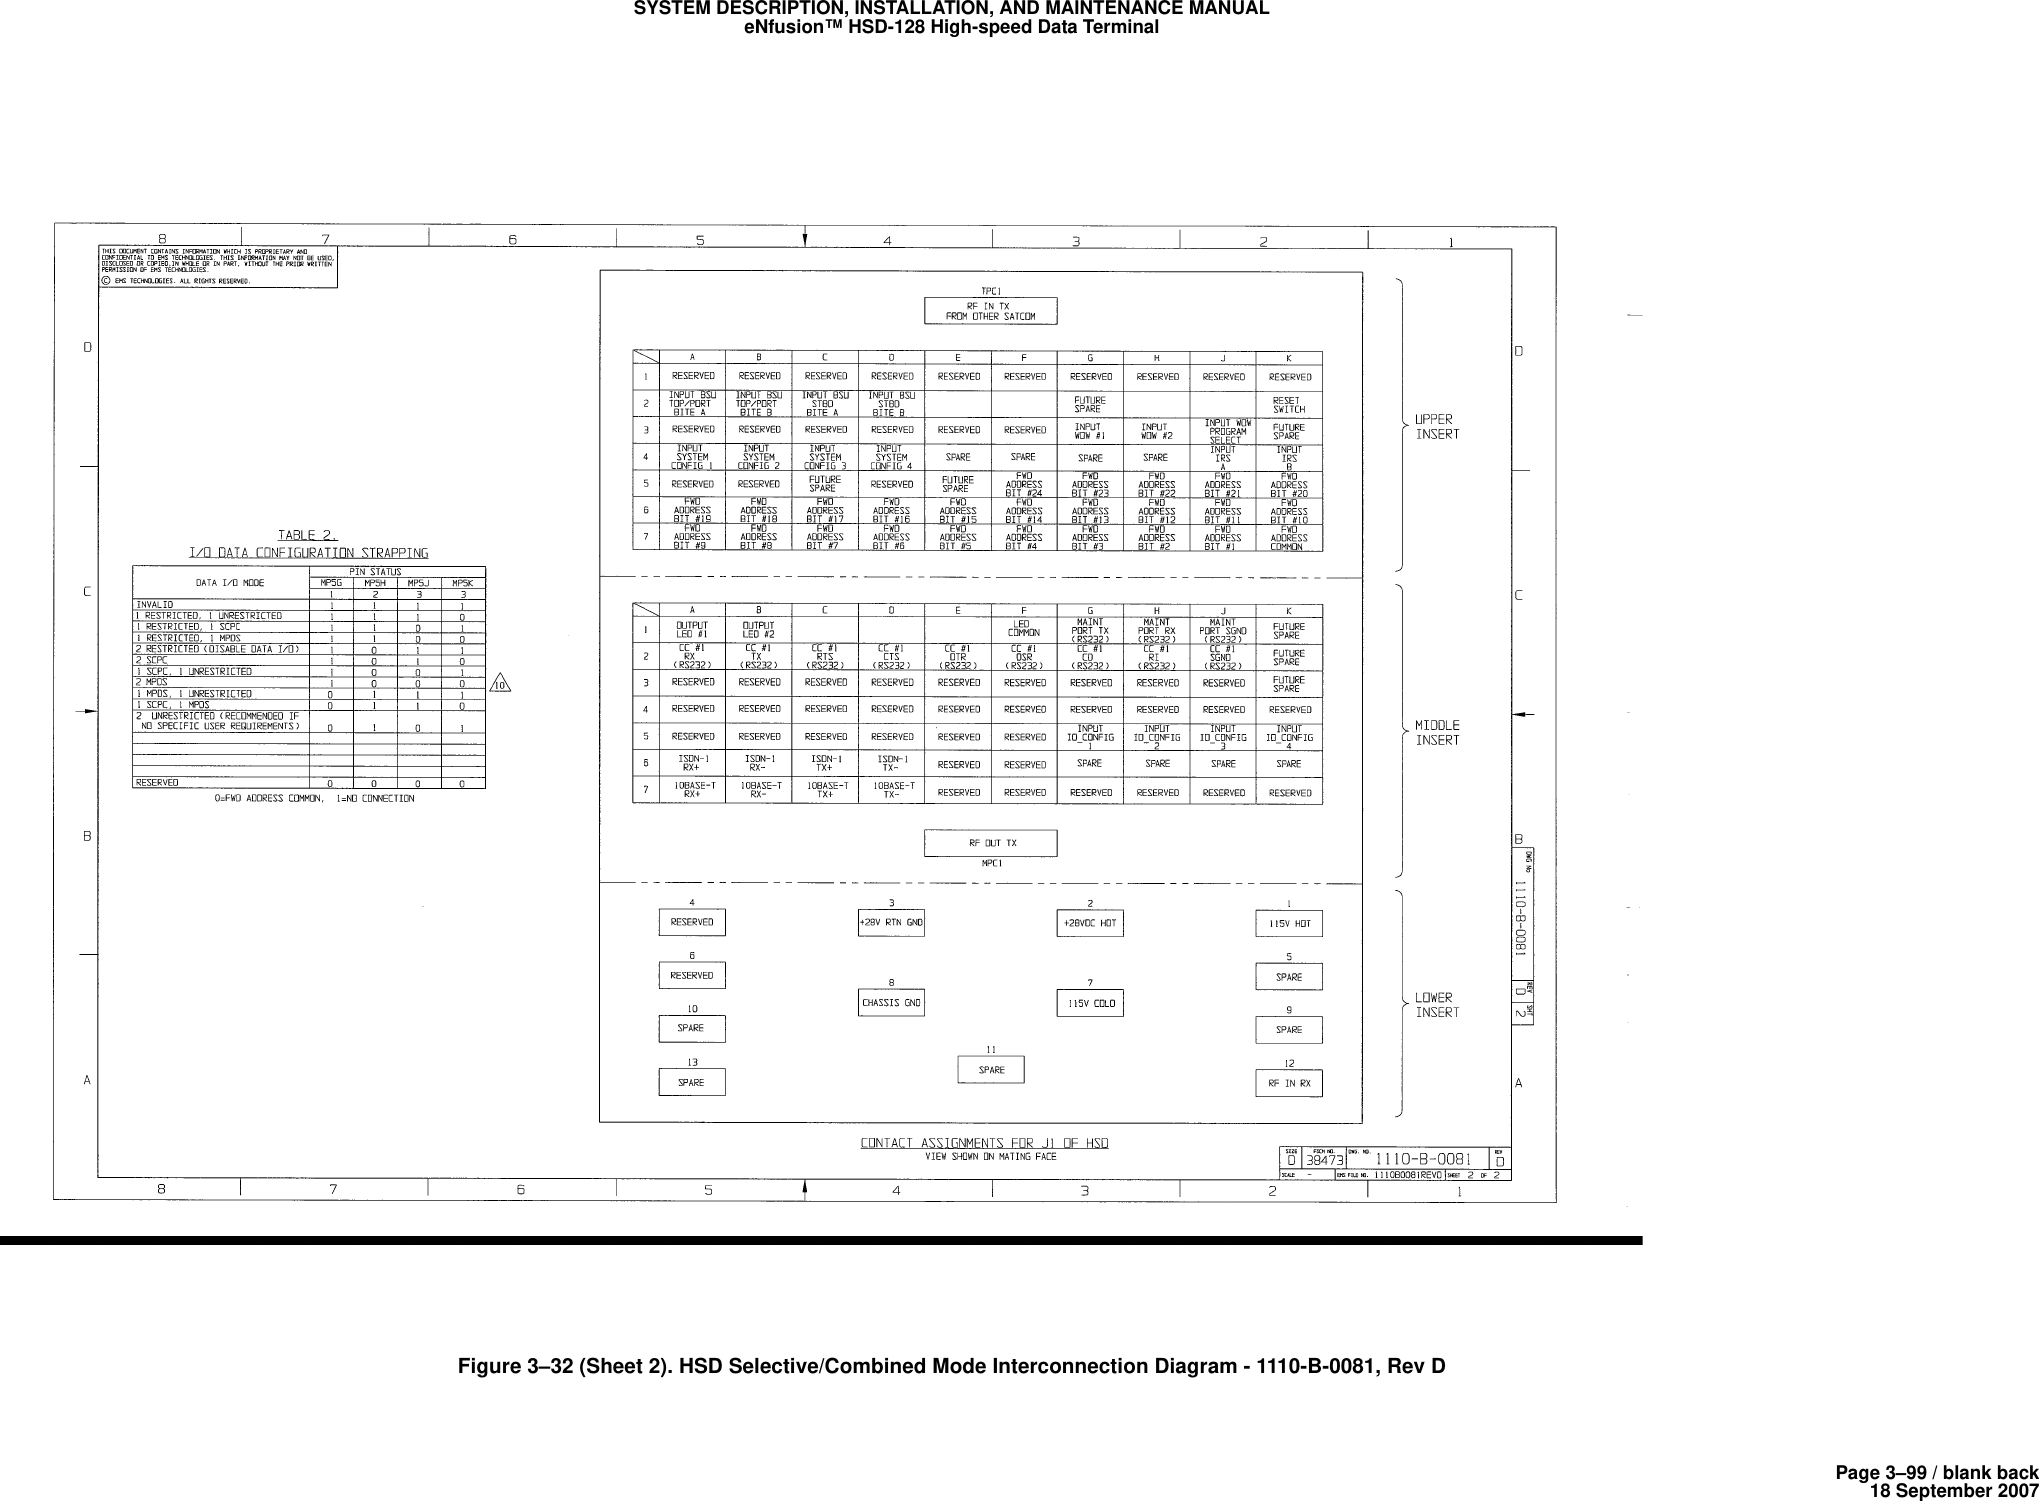 Page 3–99 / blank back18 September 2007SYSTEM DESCRIPTION, INSTALLATION, AND MAINTENANCE MANUALeNfusion™ HSD-128 High-speed Data TerminalFigure 3–32 (Sheet 2). HSD Selective/Combined Mode Interconnection Diagram - 1110-B-0081, Rev D